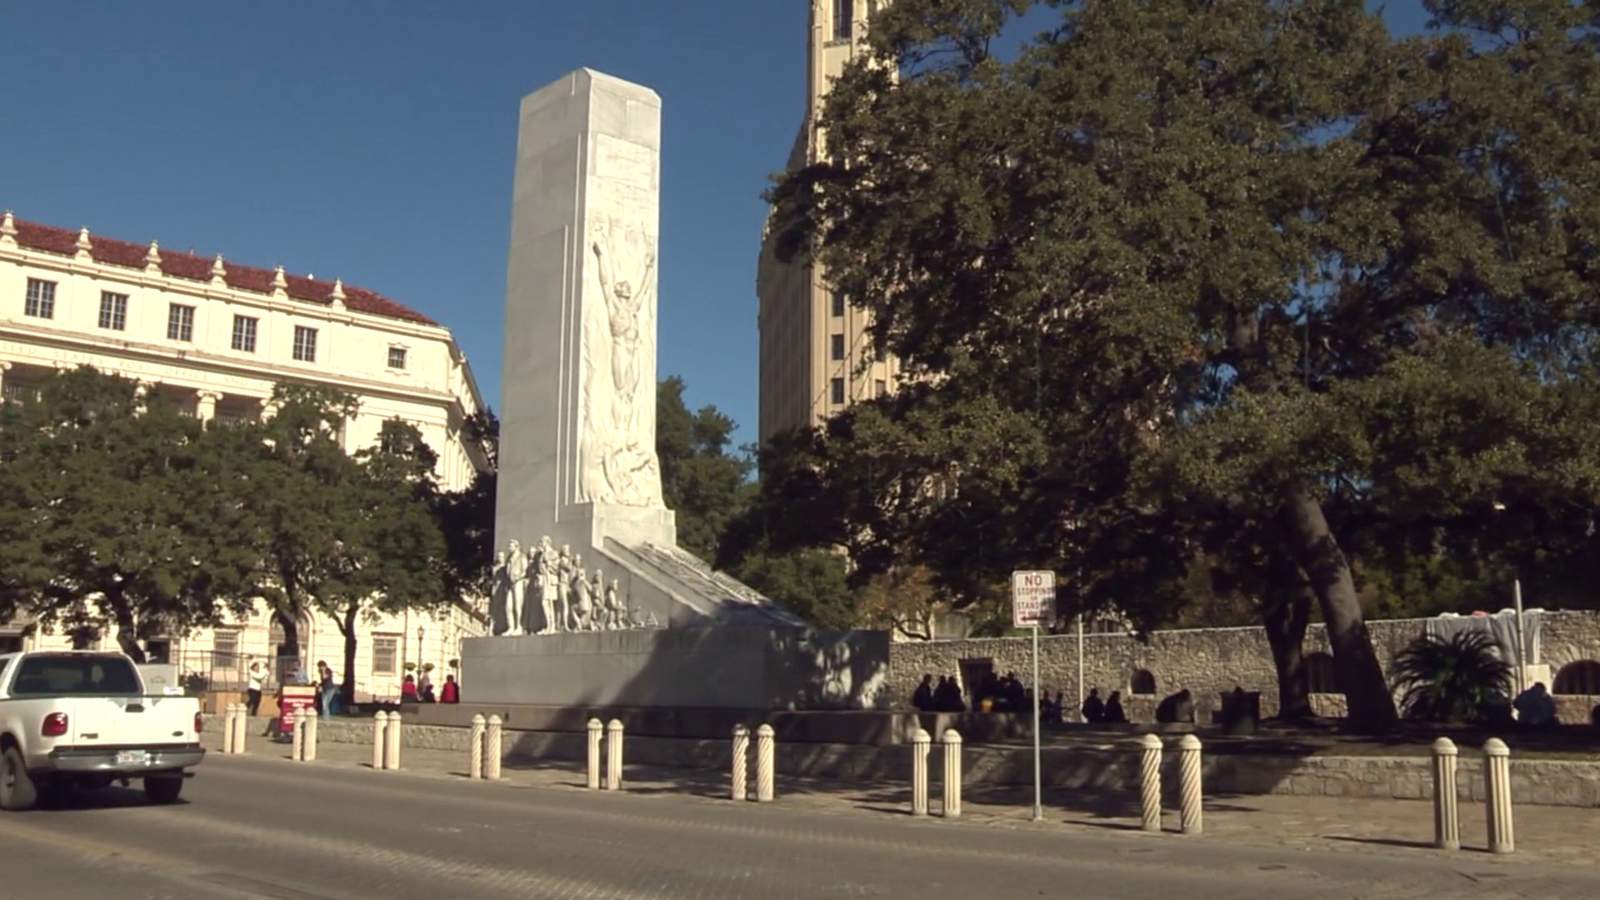 San Antonio commission approves new location for Cenotaph